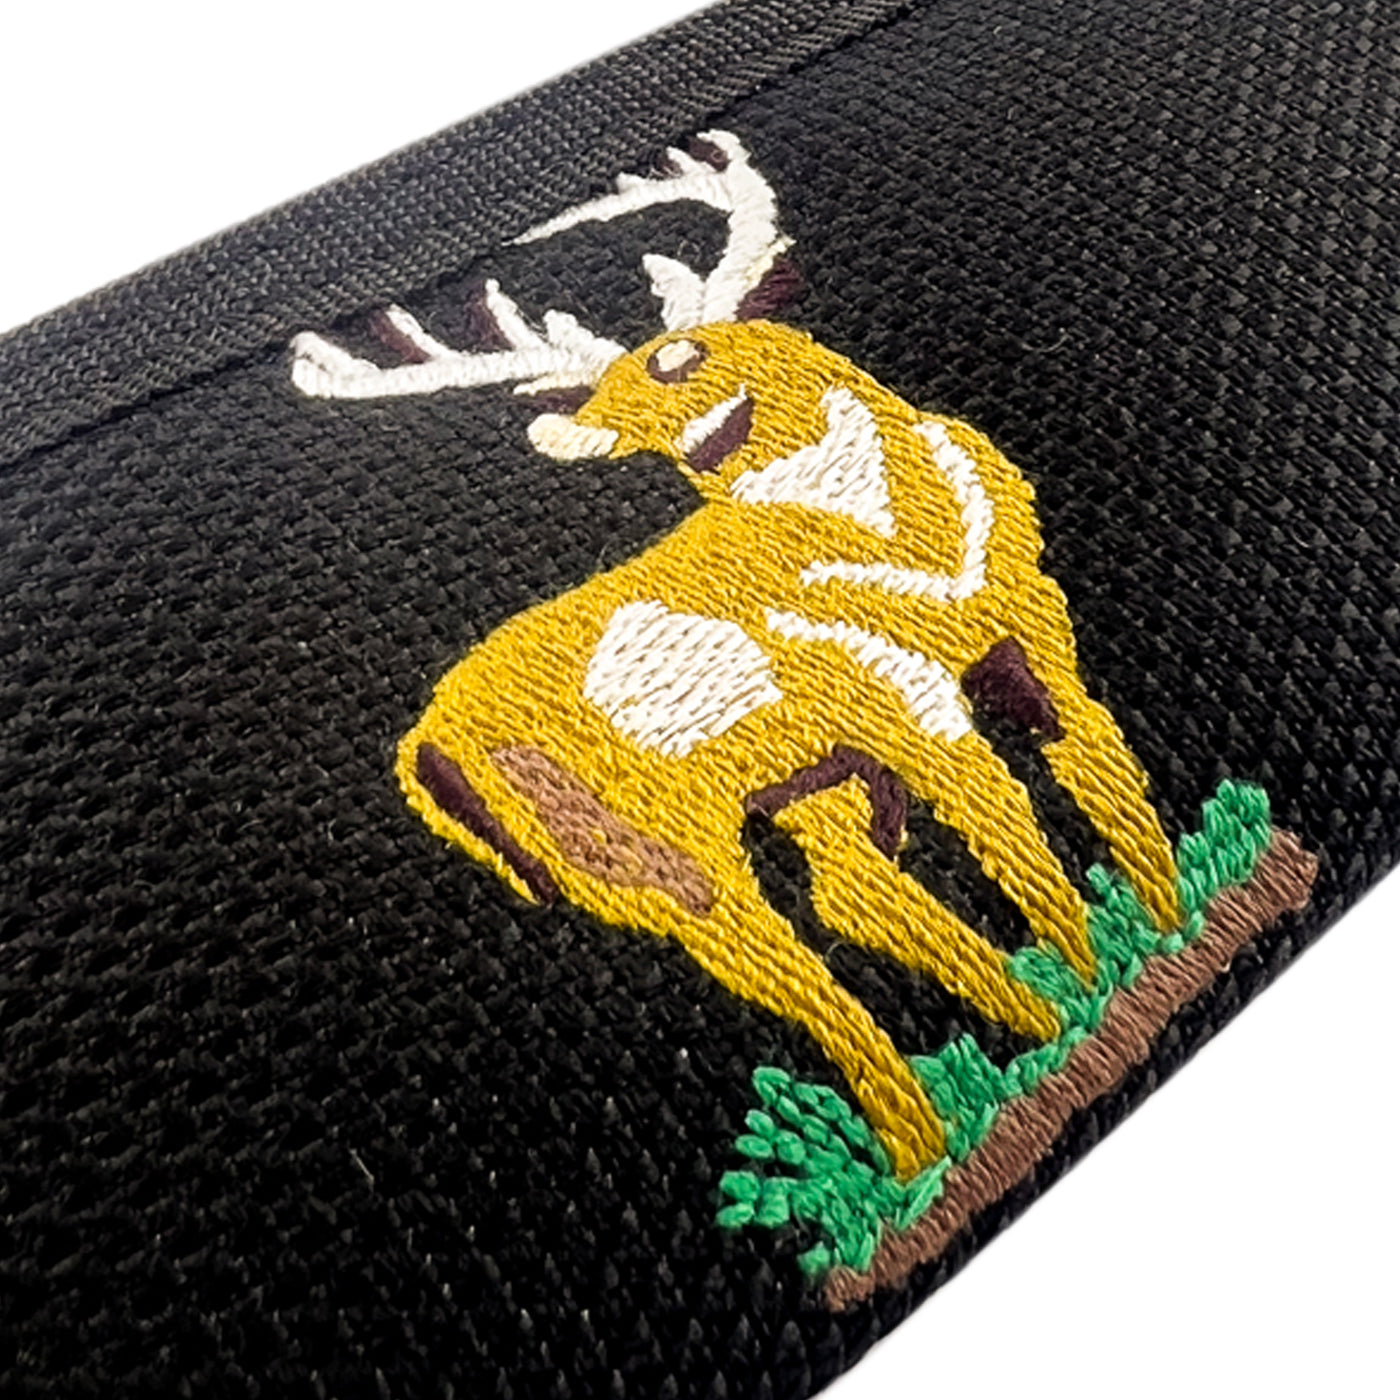 Knife Cases with Polar Interior - Elk Embroidered